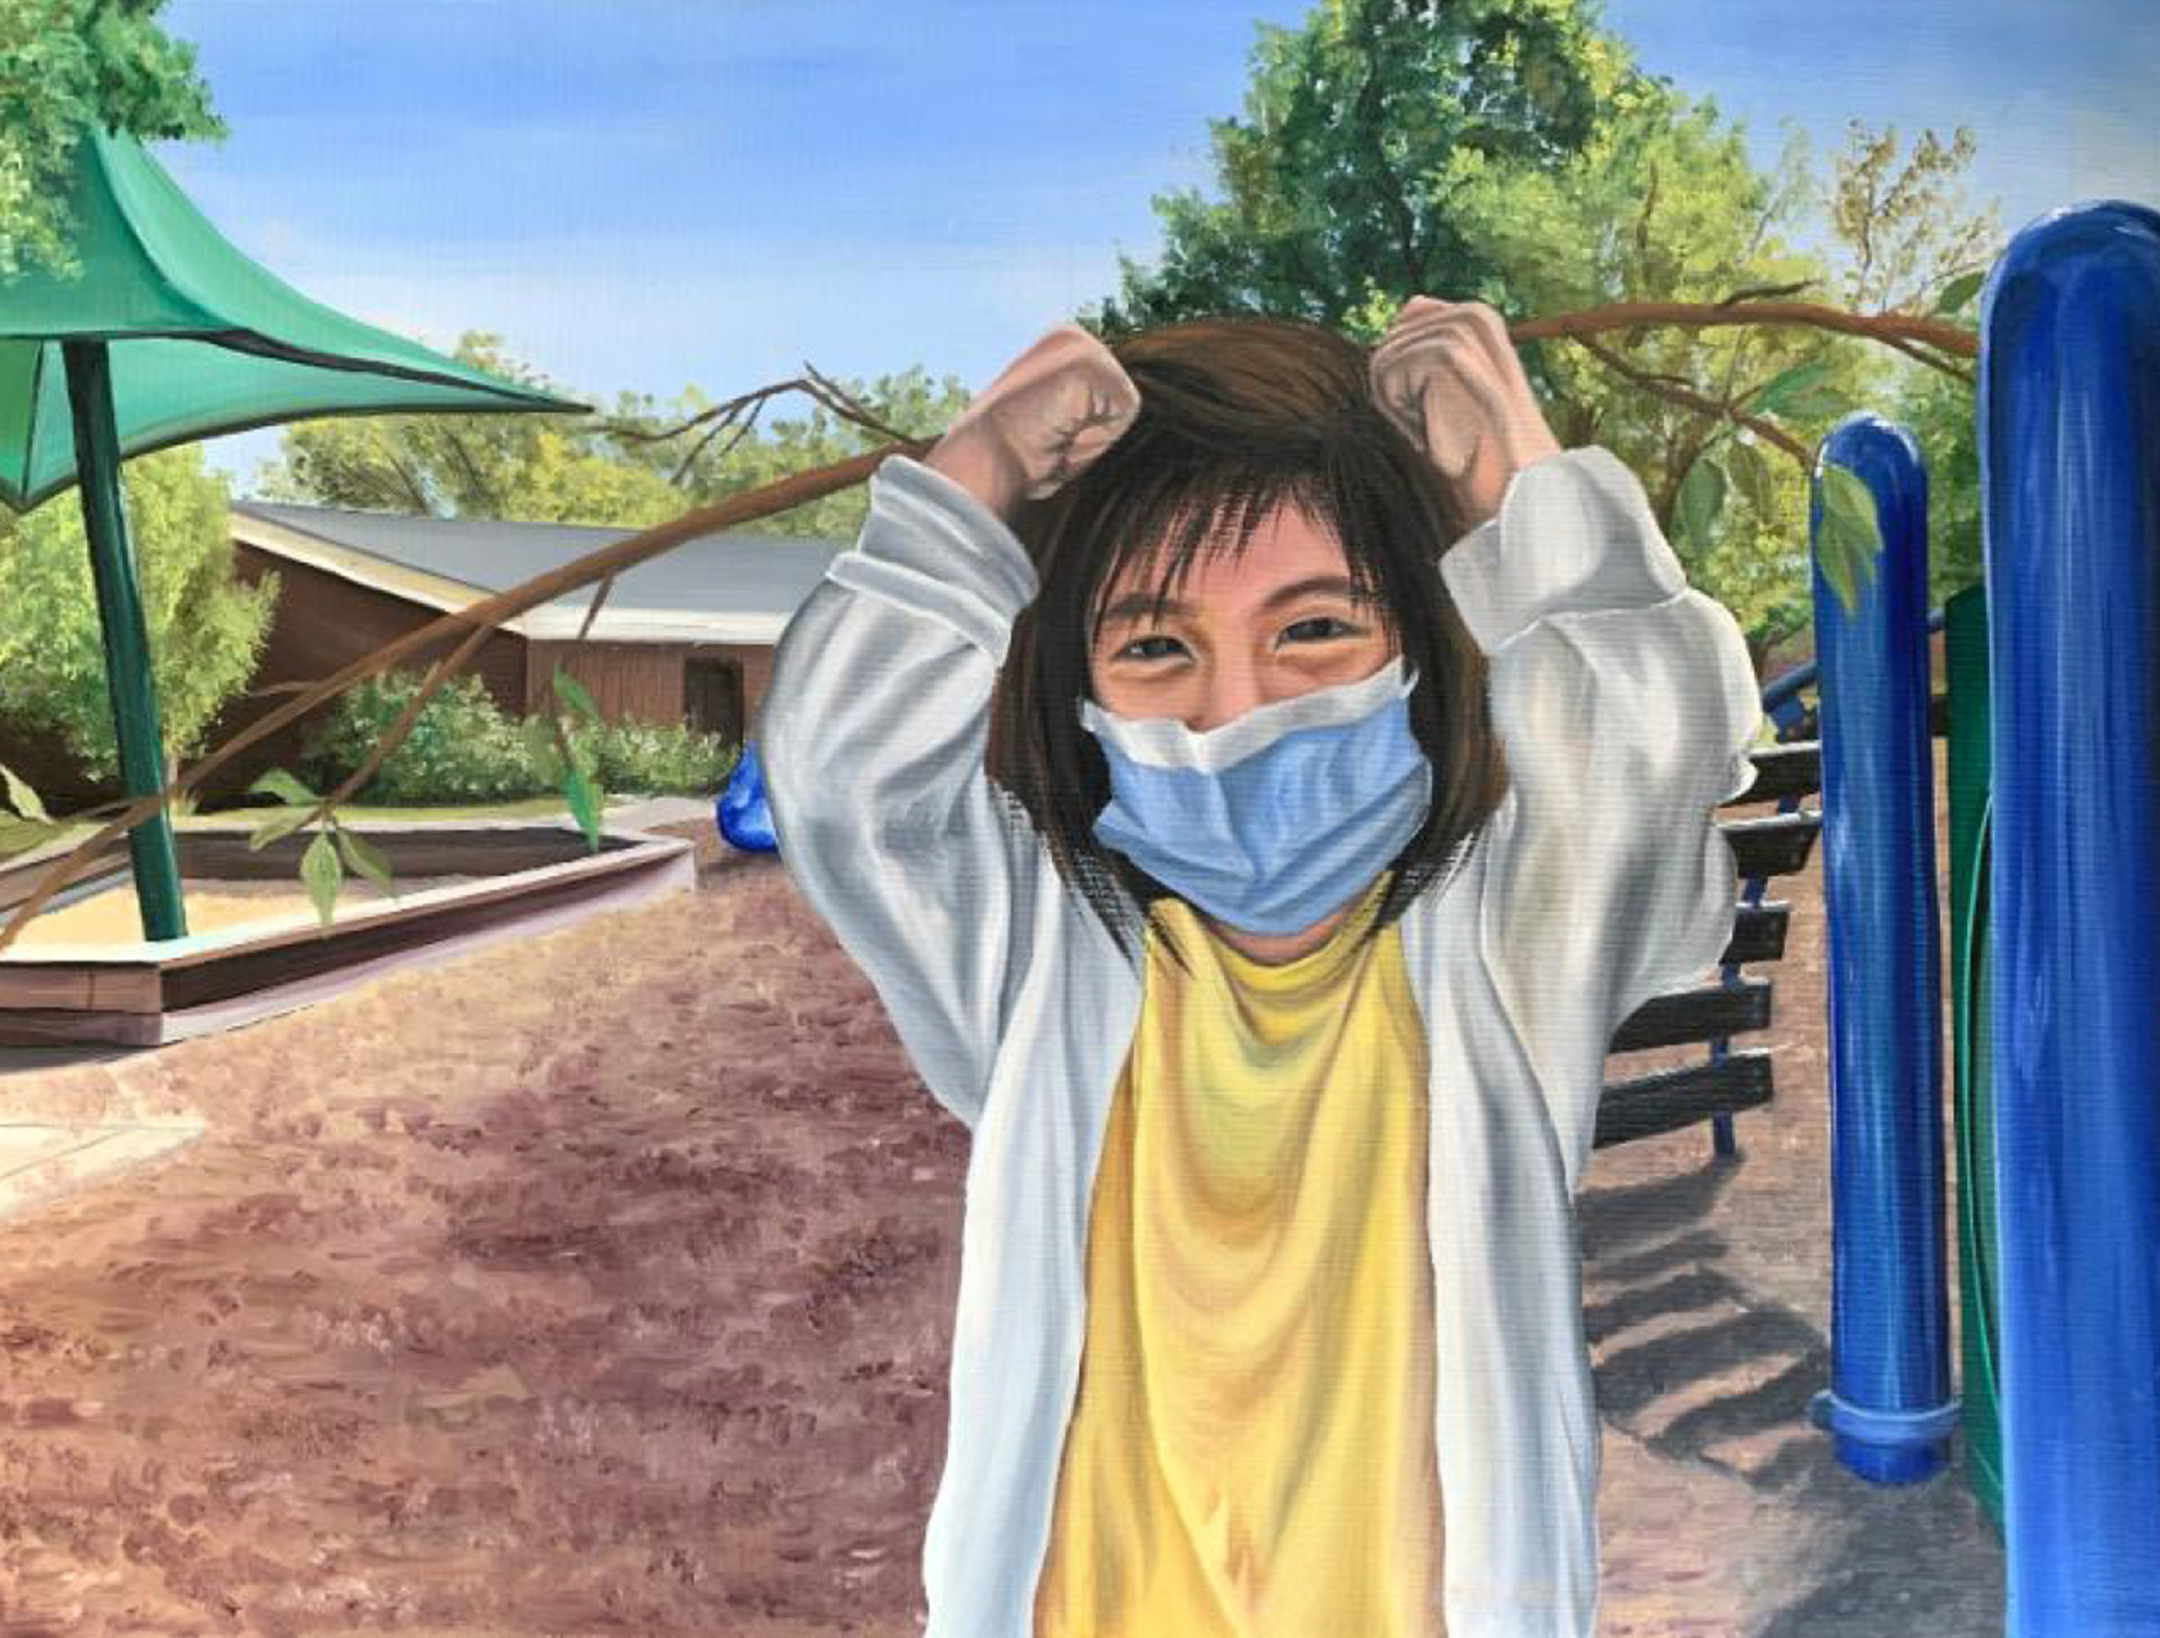 Painting of a young girl smiling in front of playground equipment